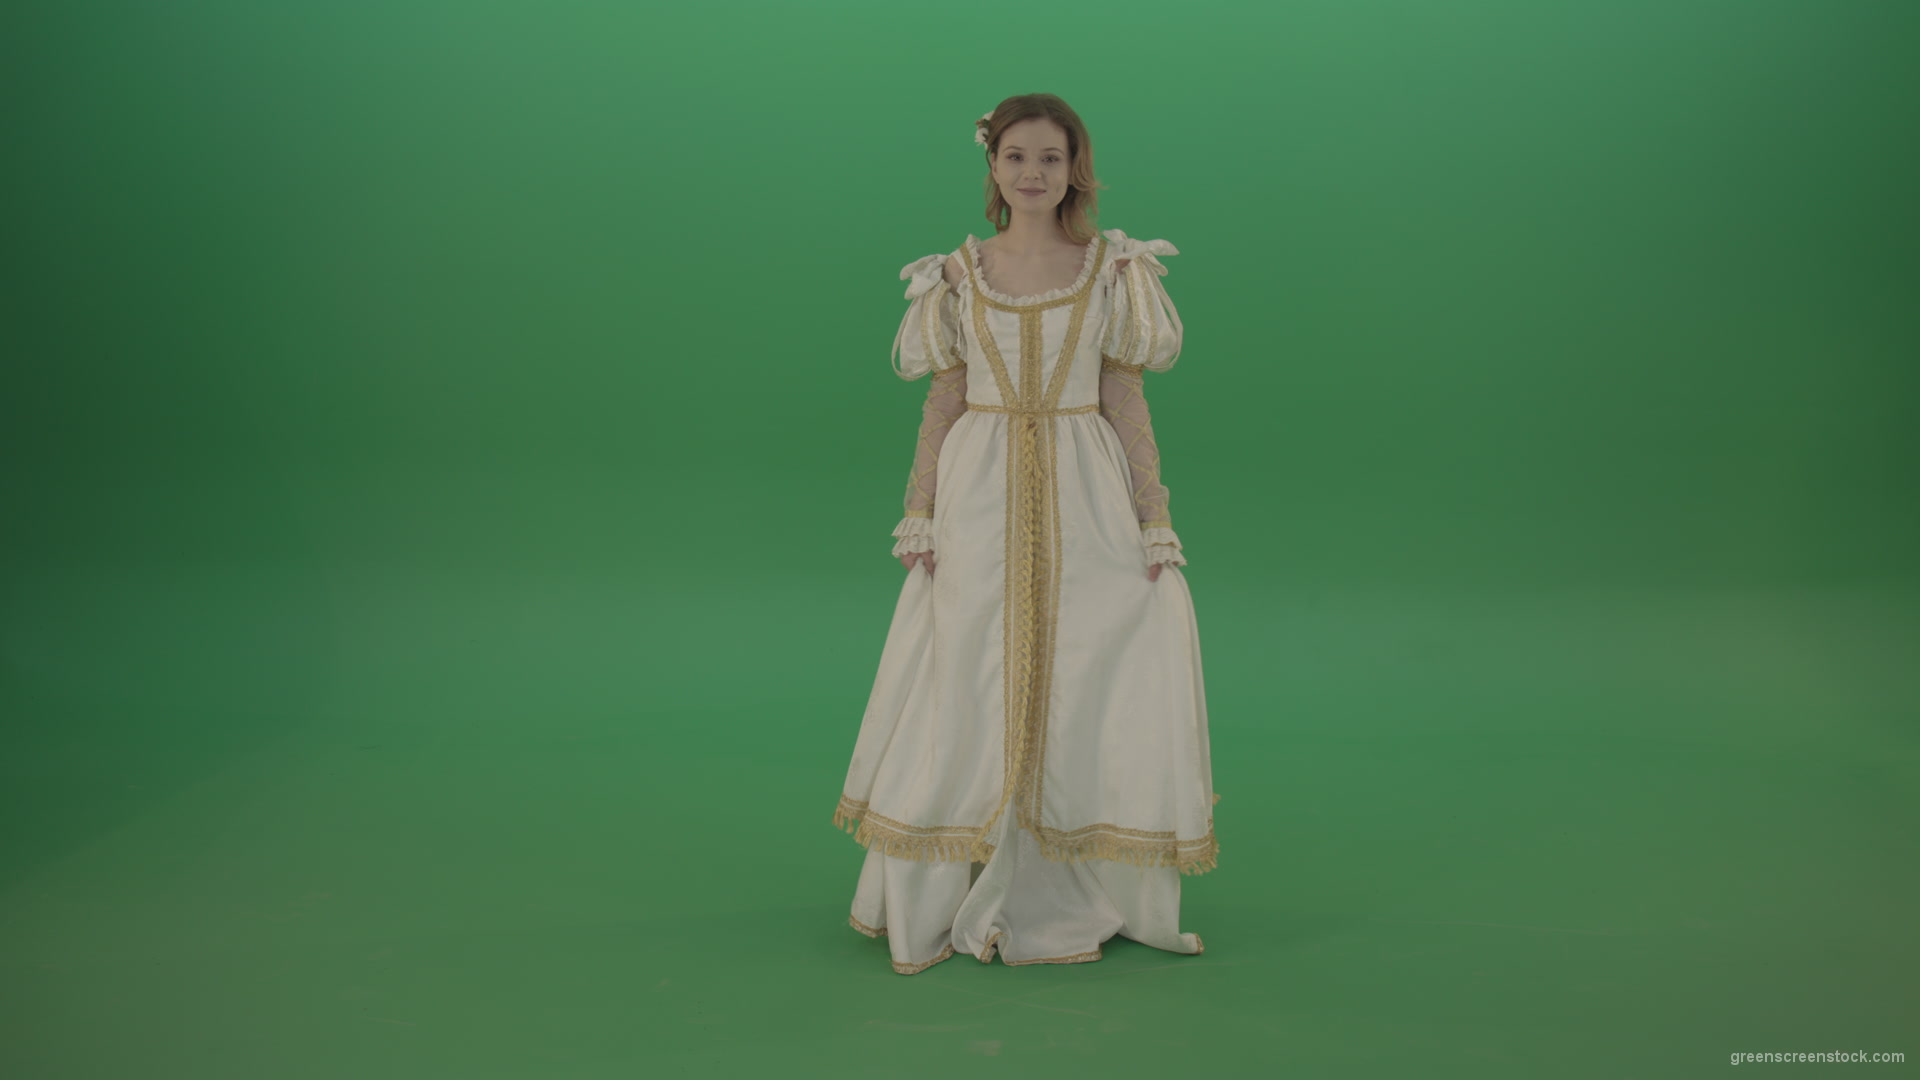 Easy-bowed-girl-is-happy-to-meet-isolated-on-green-screen_002 Green Screen Stock